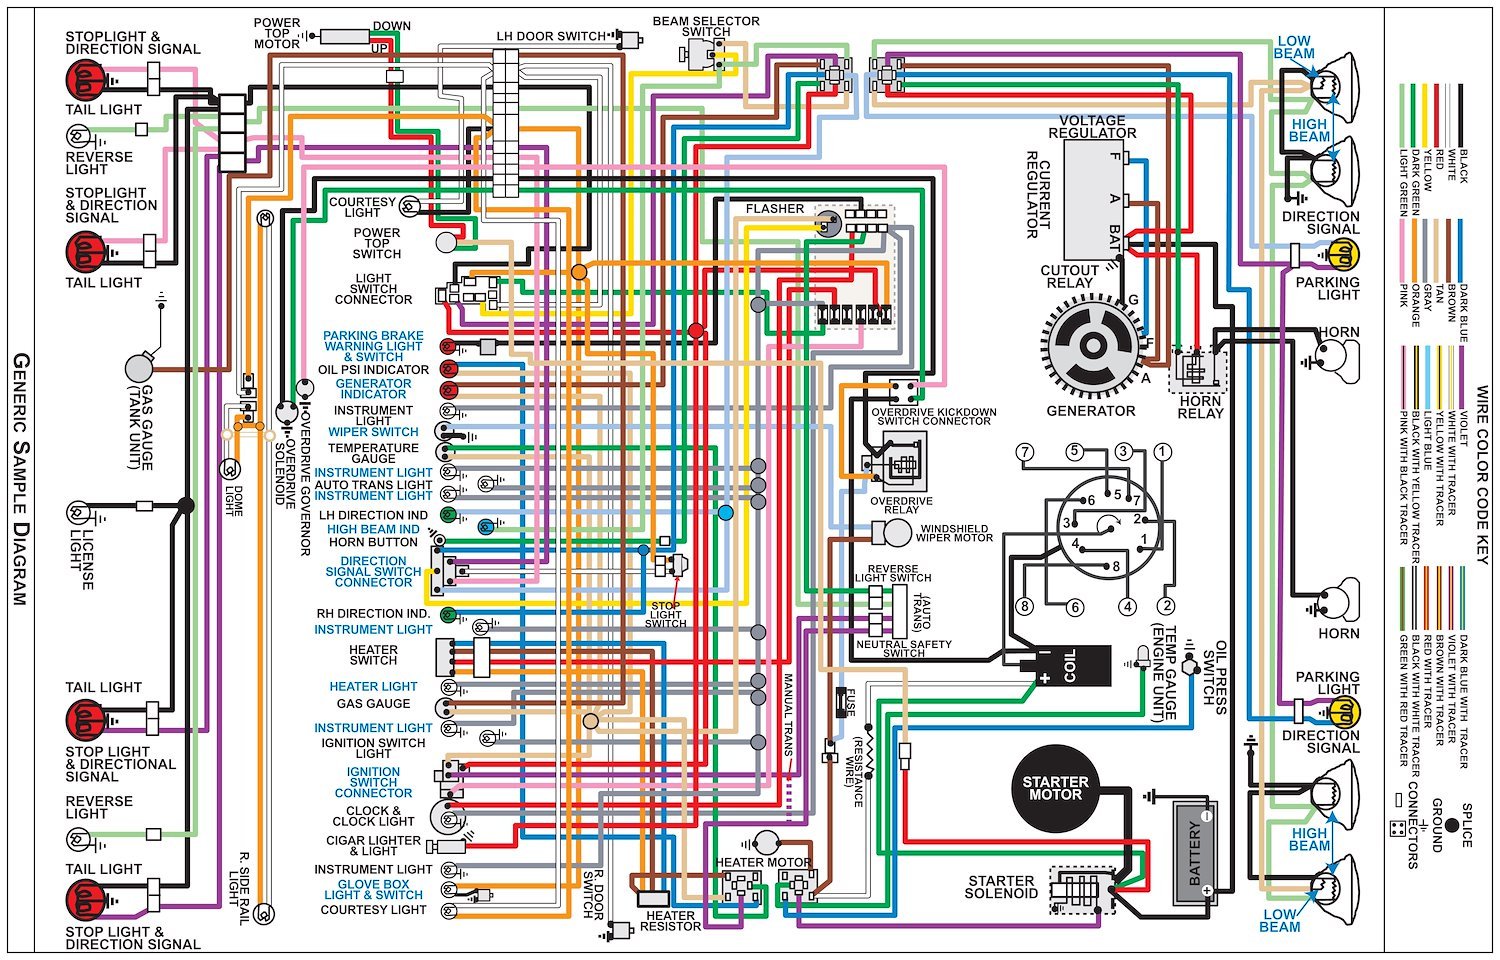 Wiring Diagram for 1966 Ford Falcon, 11 in x 17 in., Laminated